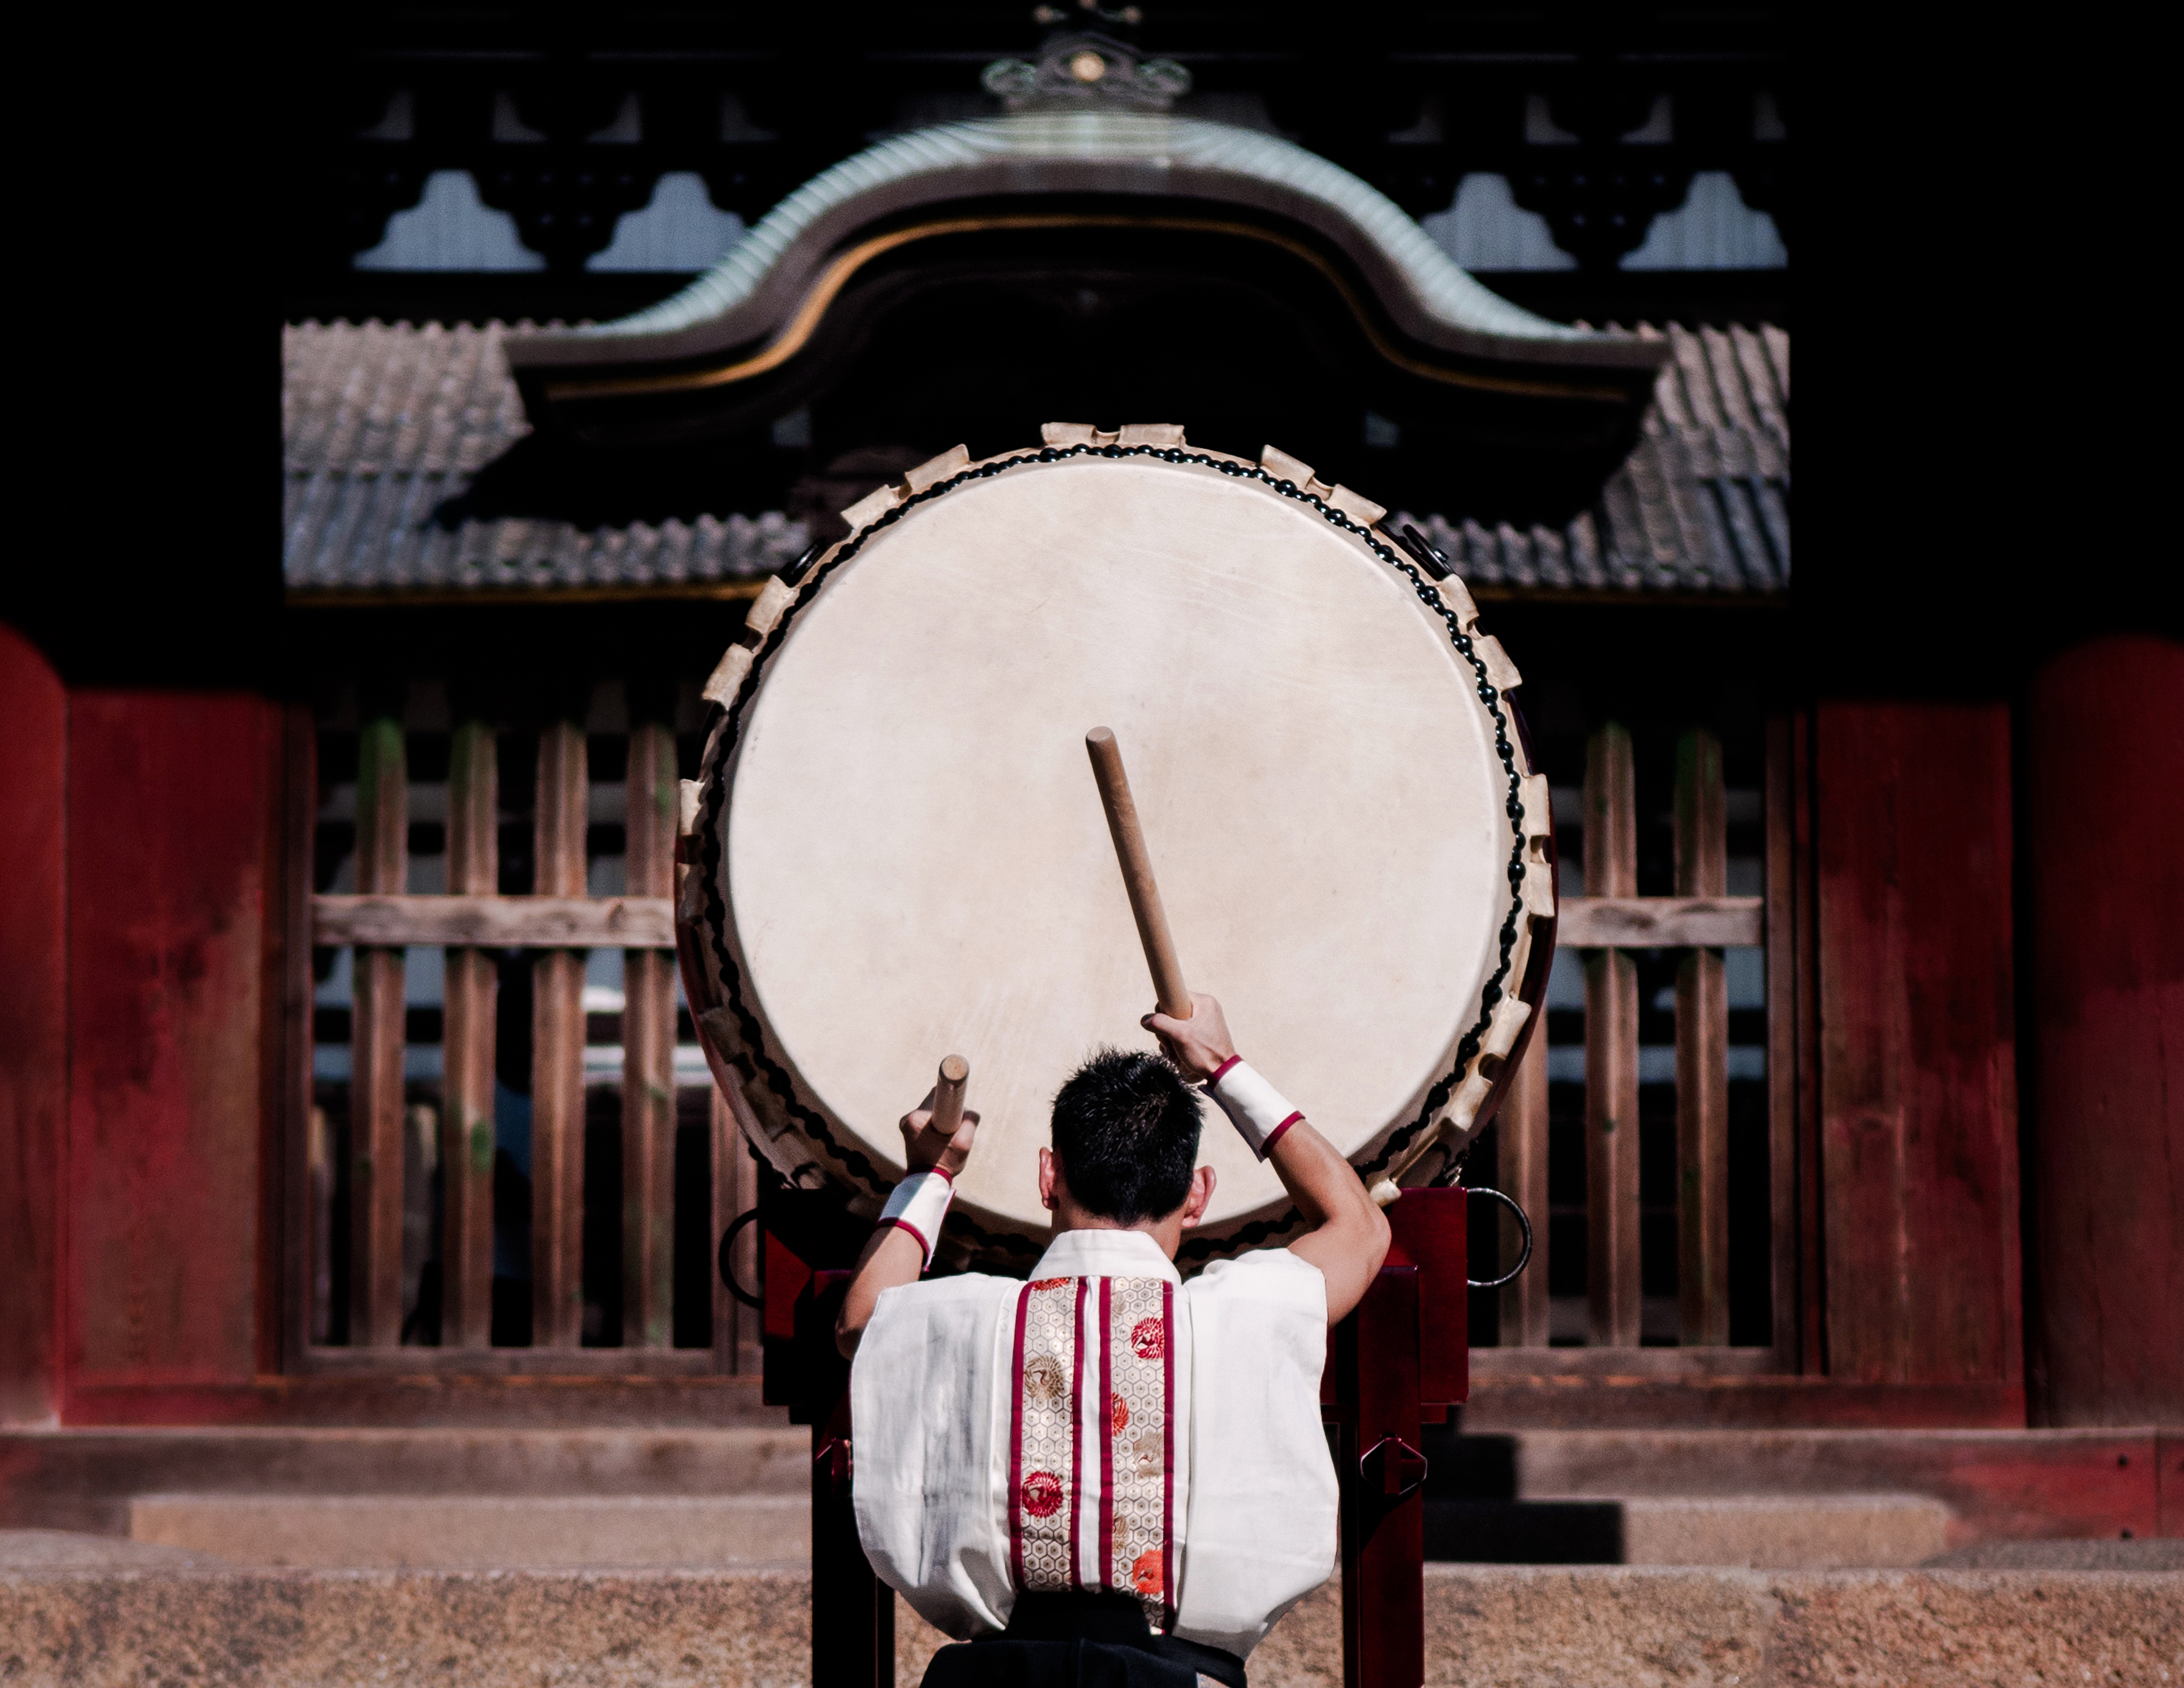 A taiko drummer in Kyoto, Japan